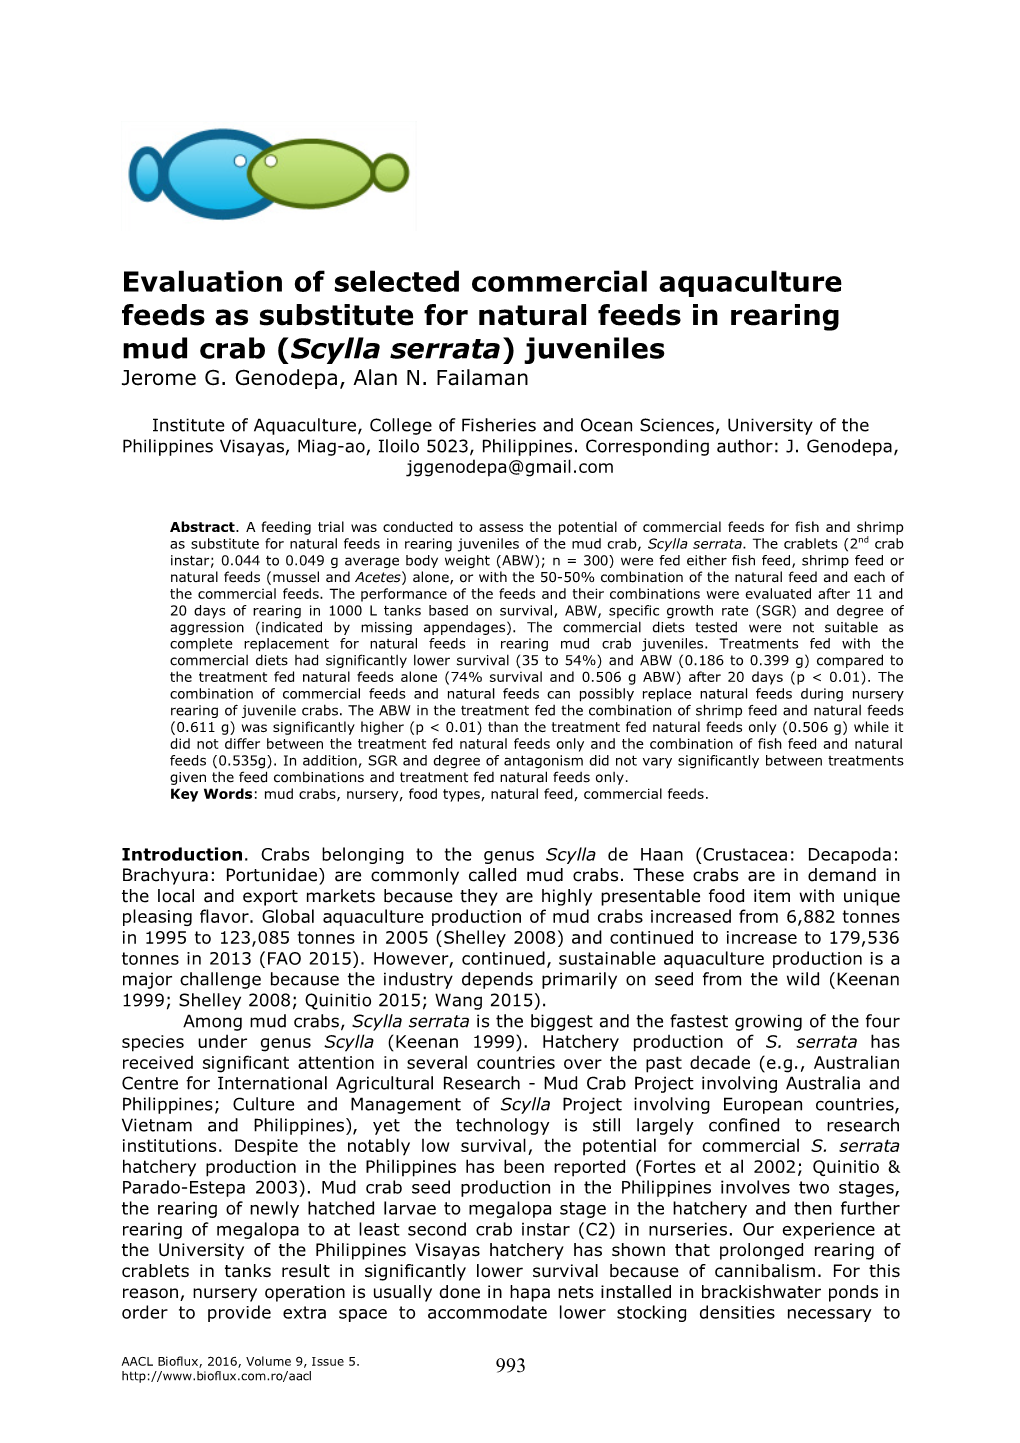 Evaluation of Selected Commercial Aquaculture Feeds As Substitute for Natural Feeds in Rearing Mud Crab (Scylla Serrata) Juveniles Jerome G